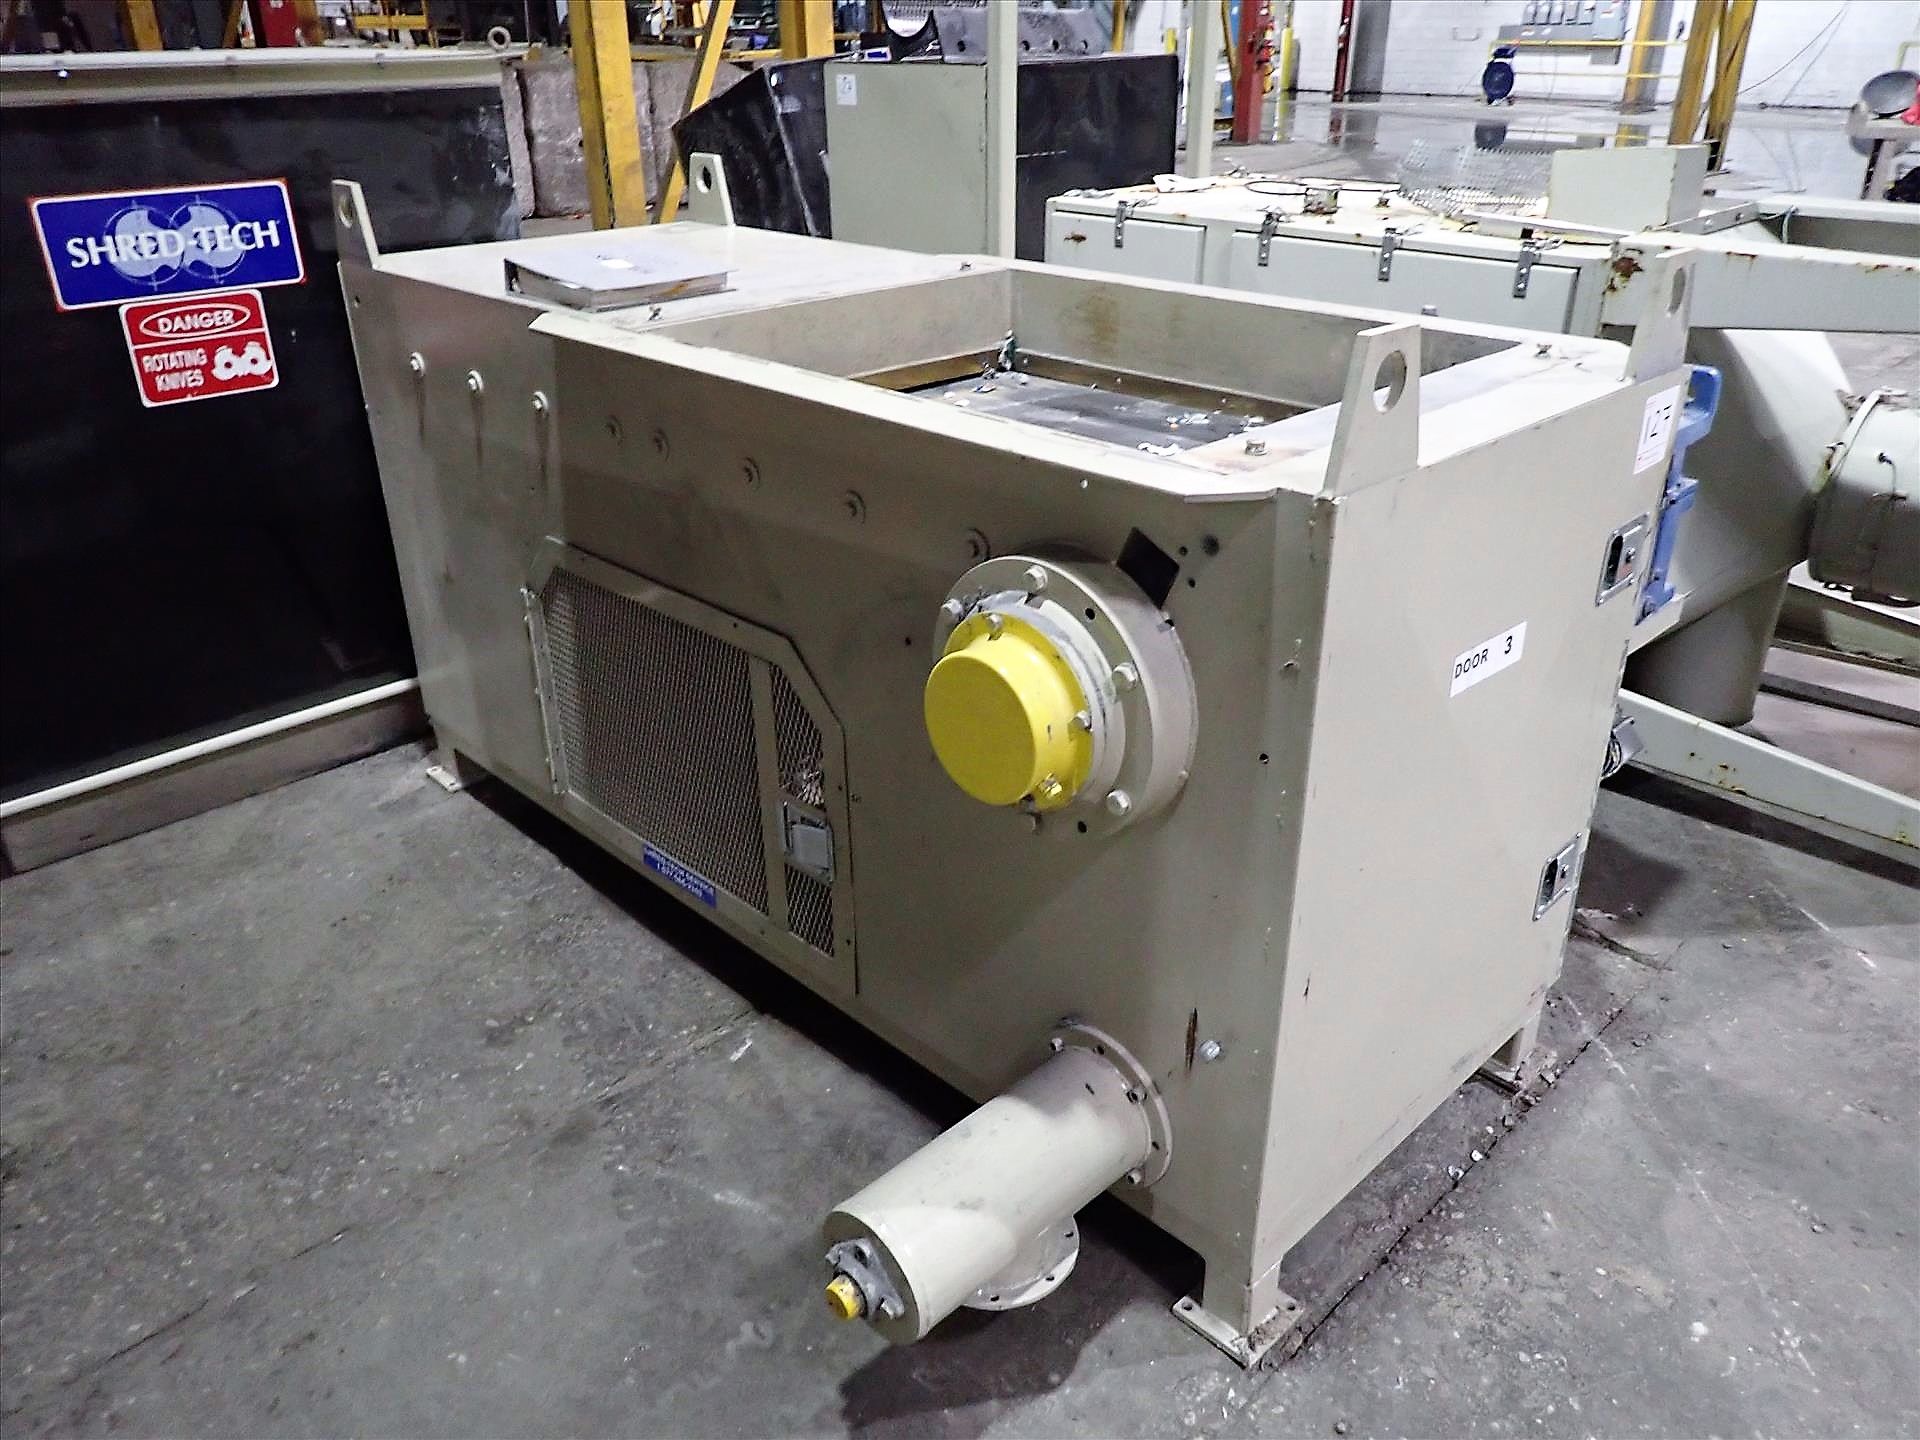 Shred-Tech shredder, mod. STS-45, ser. no. STS-45-A868-03-04 c/w feed hopper, waste auger, approx.